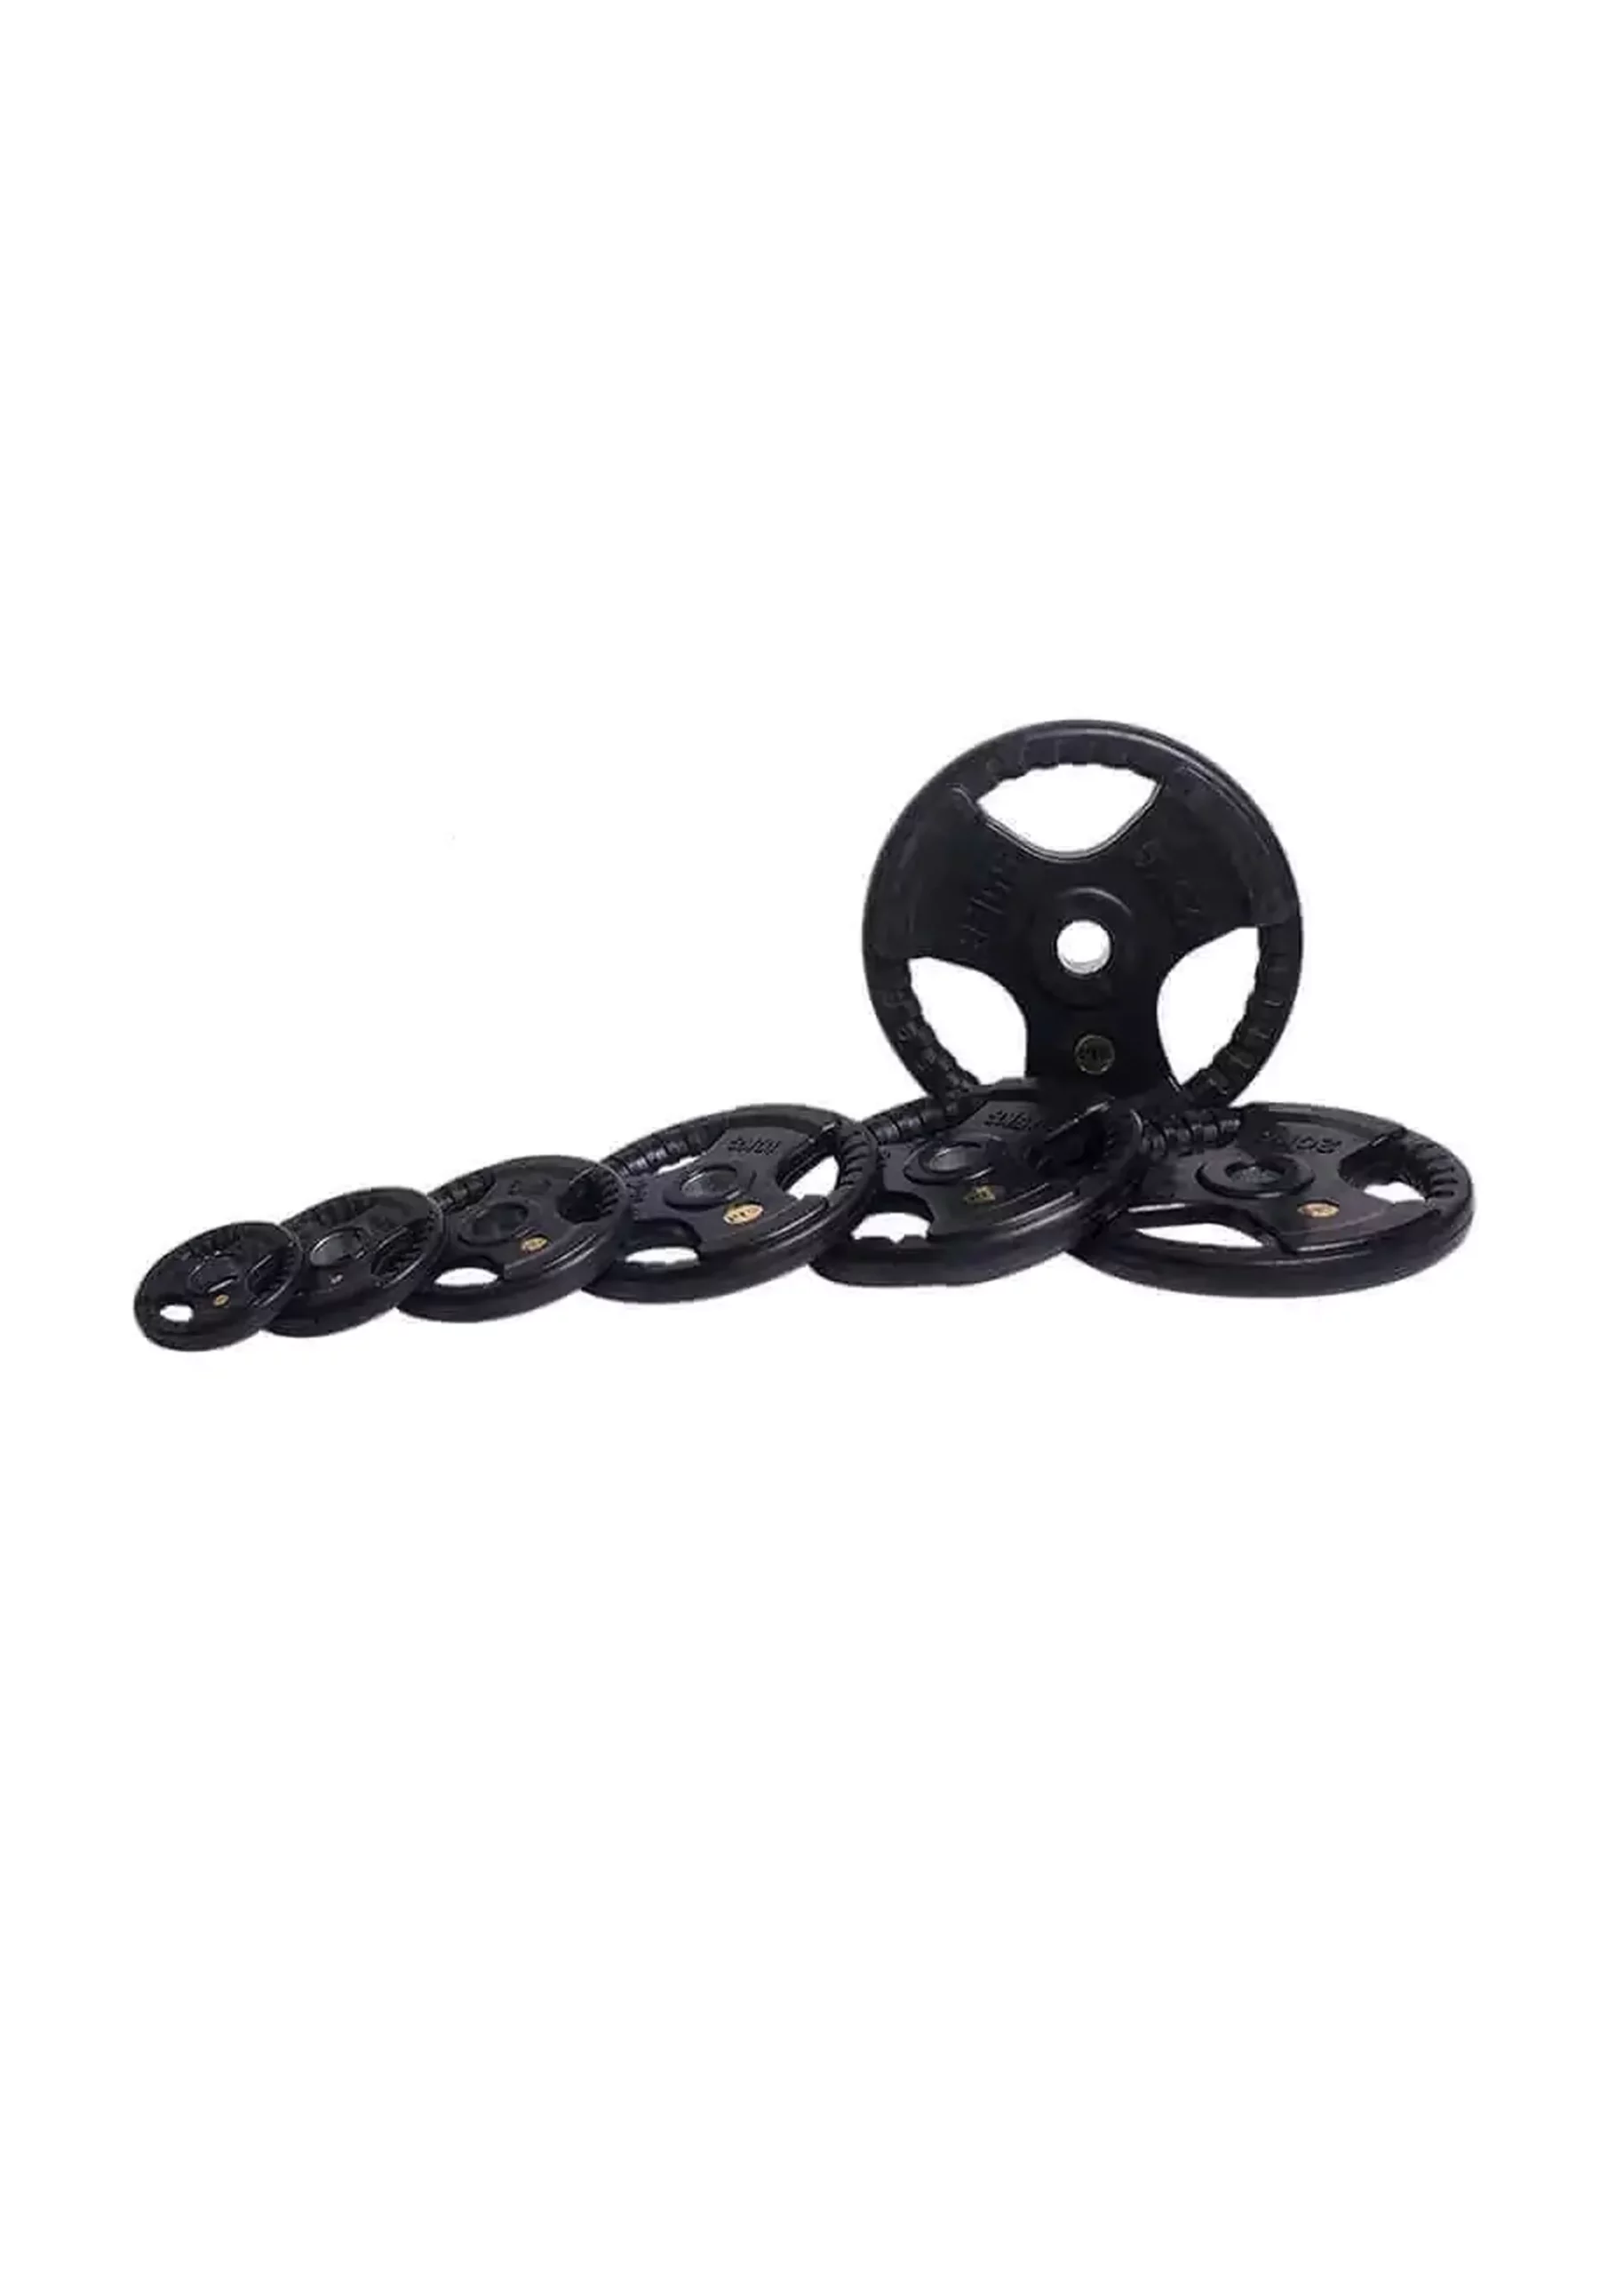 TRIPGRIP RUBBER COATED REGULAR WEIGHT PLATE (RS 1279 PER 1KG)